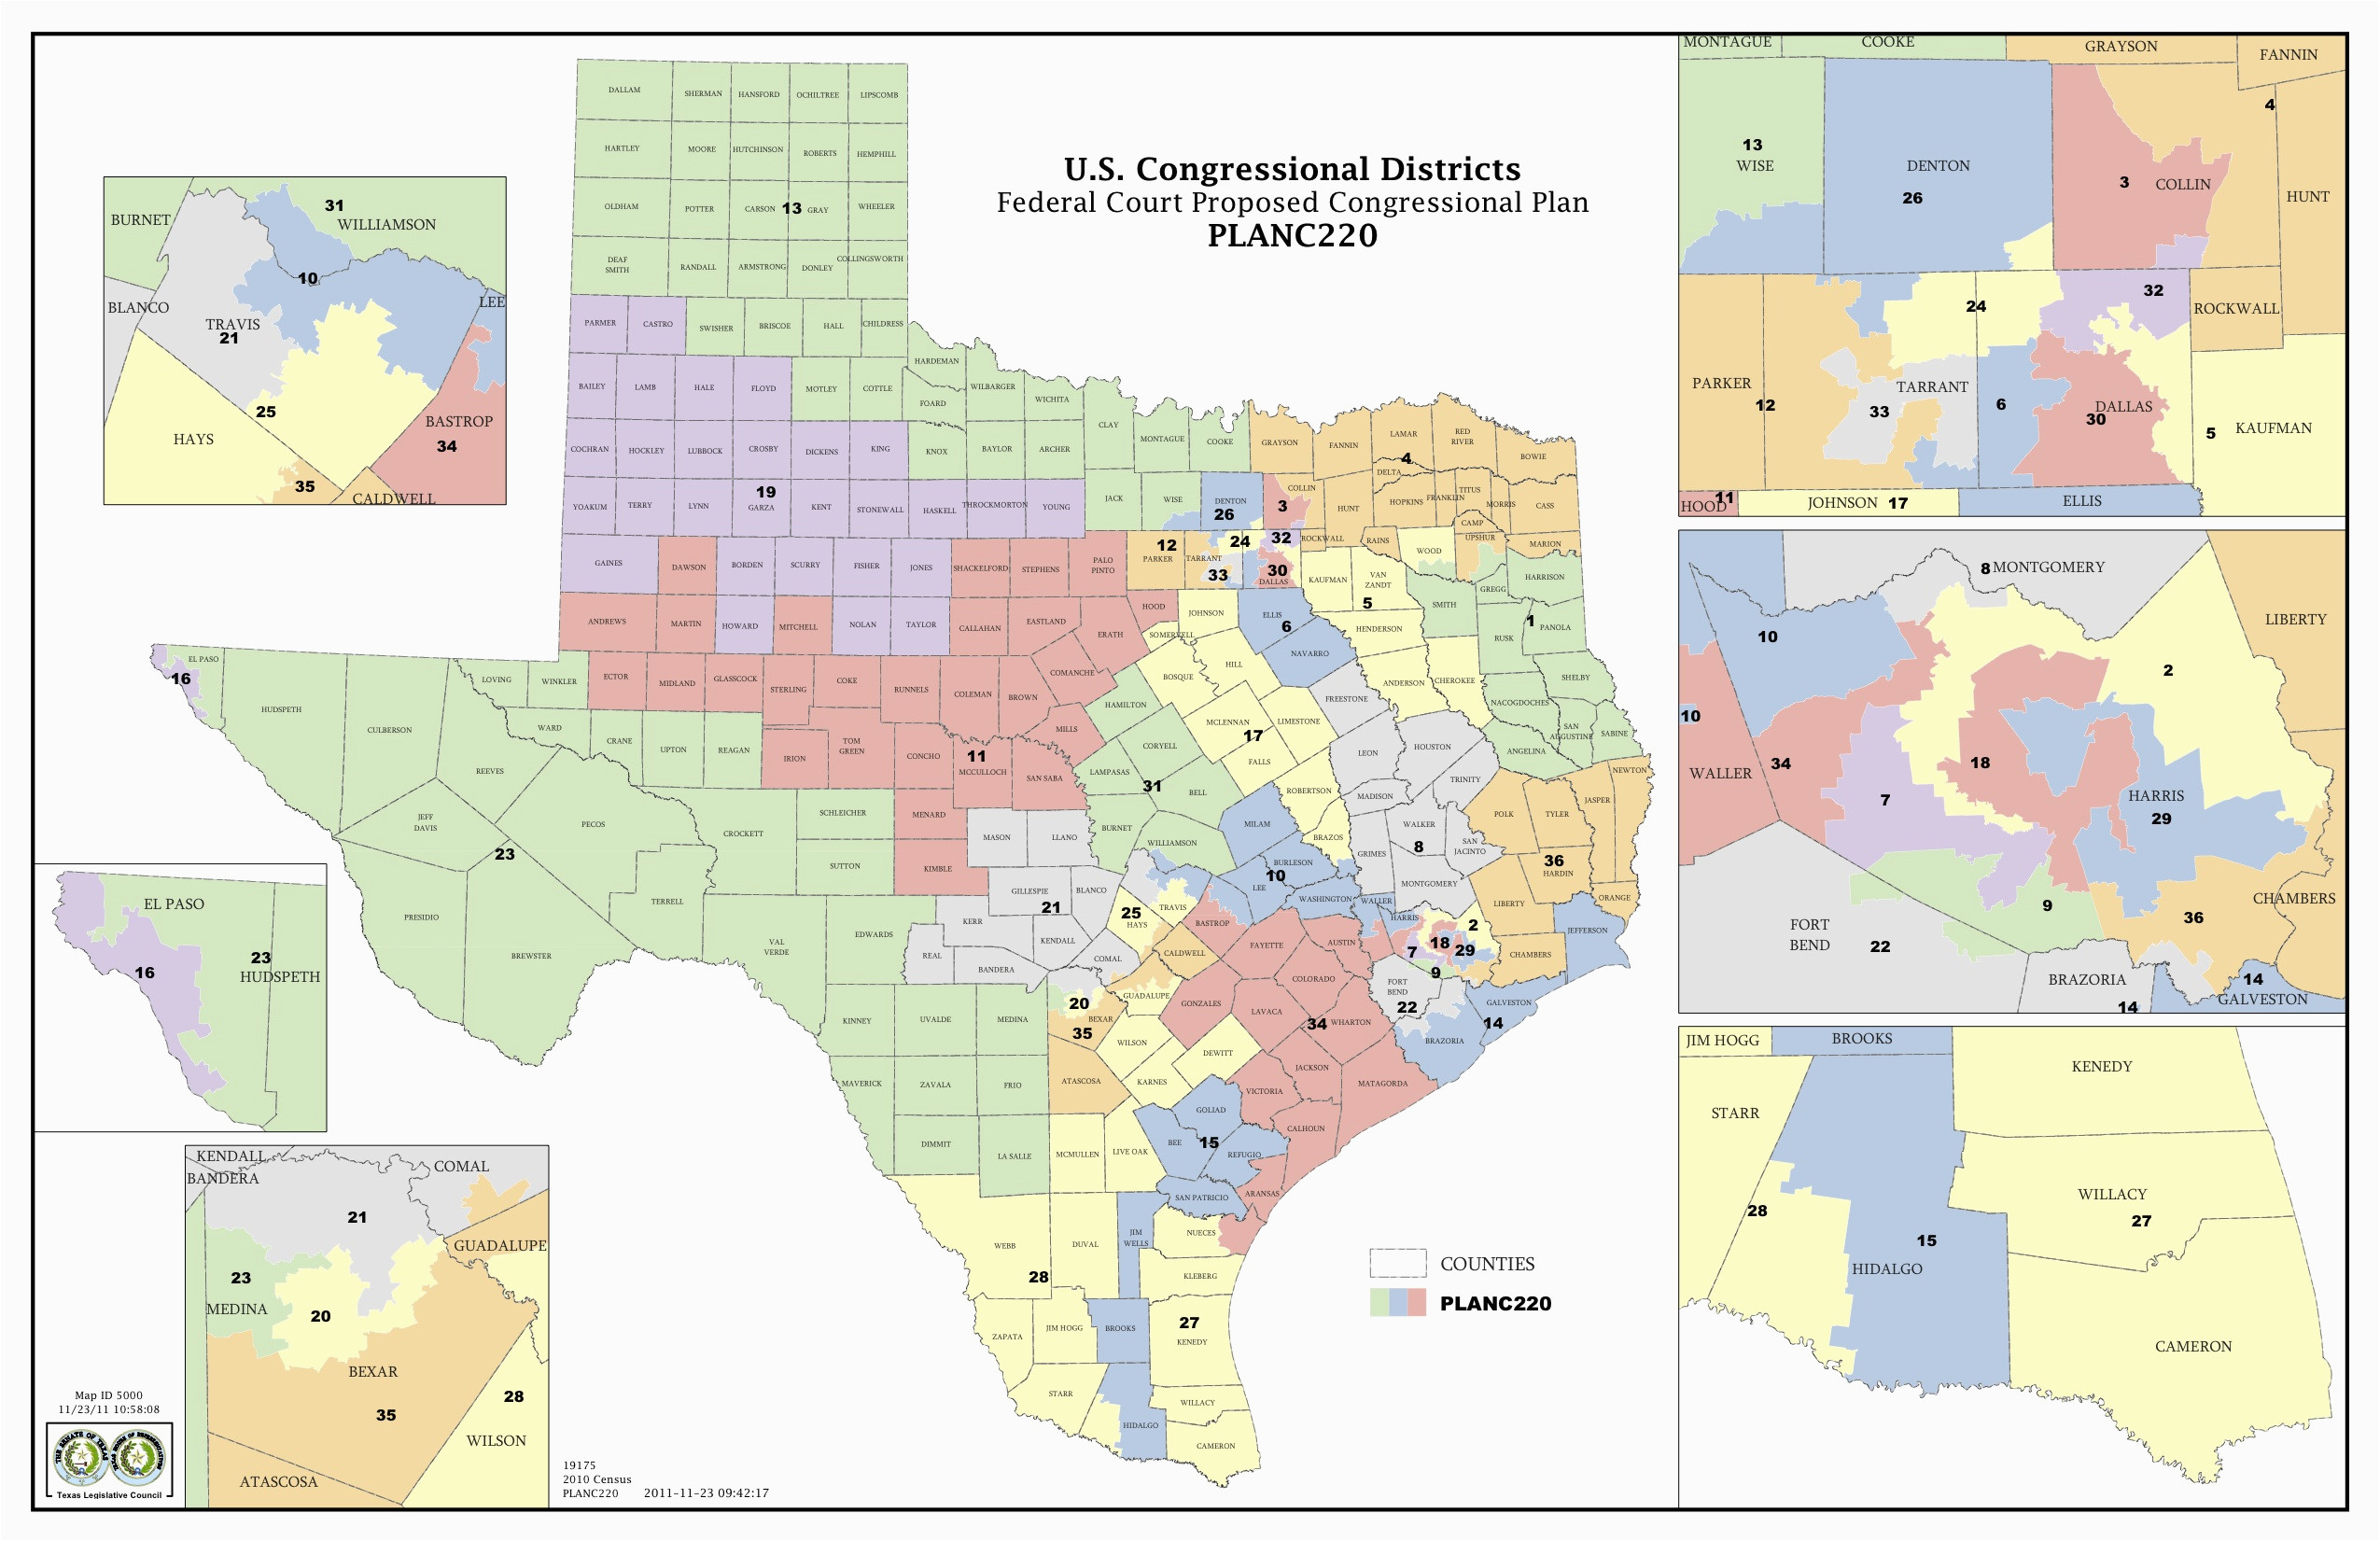 Texas 23rd Congressional District Map Map Of Texas Congressional Districts Business Ideas 2013 Of Texas 23rd Congressional District Map 